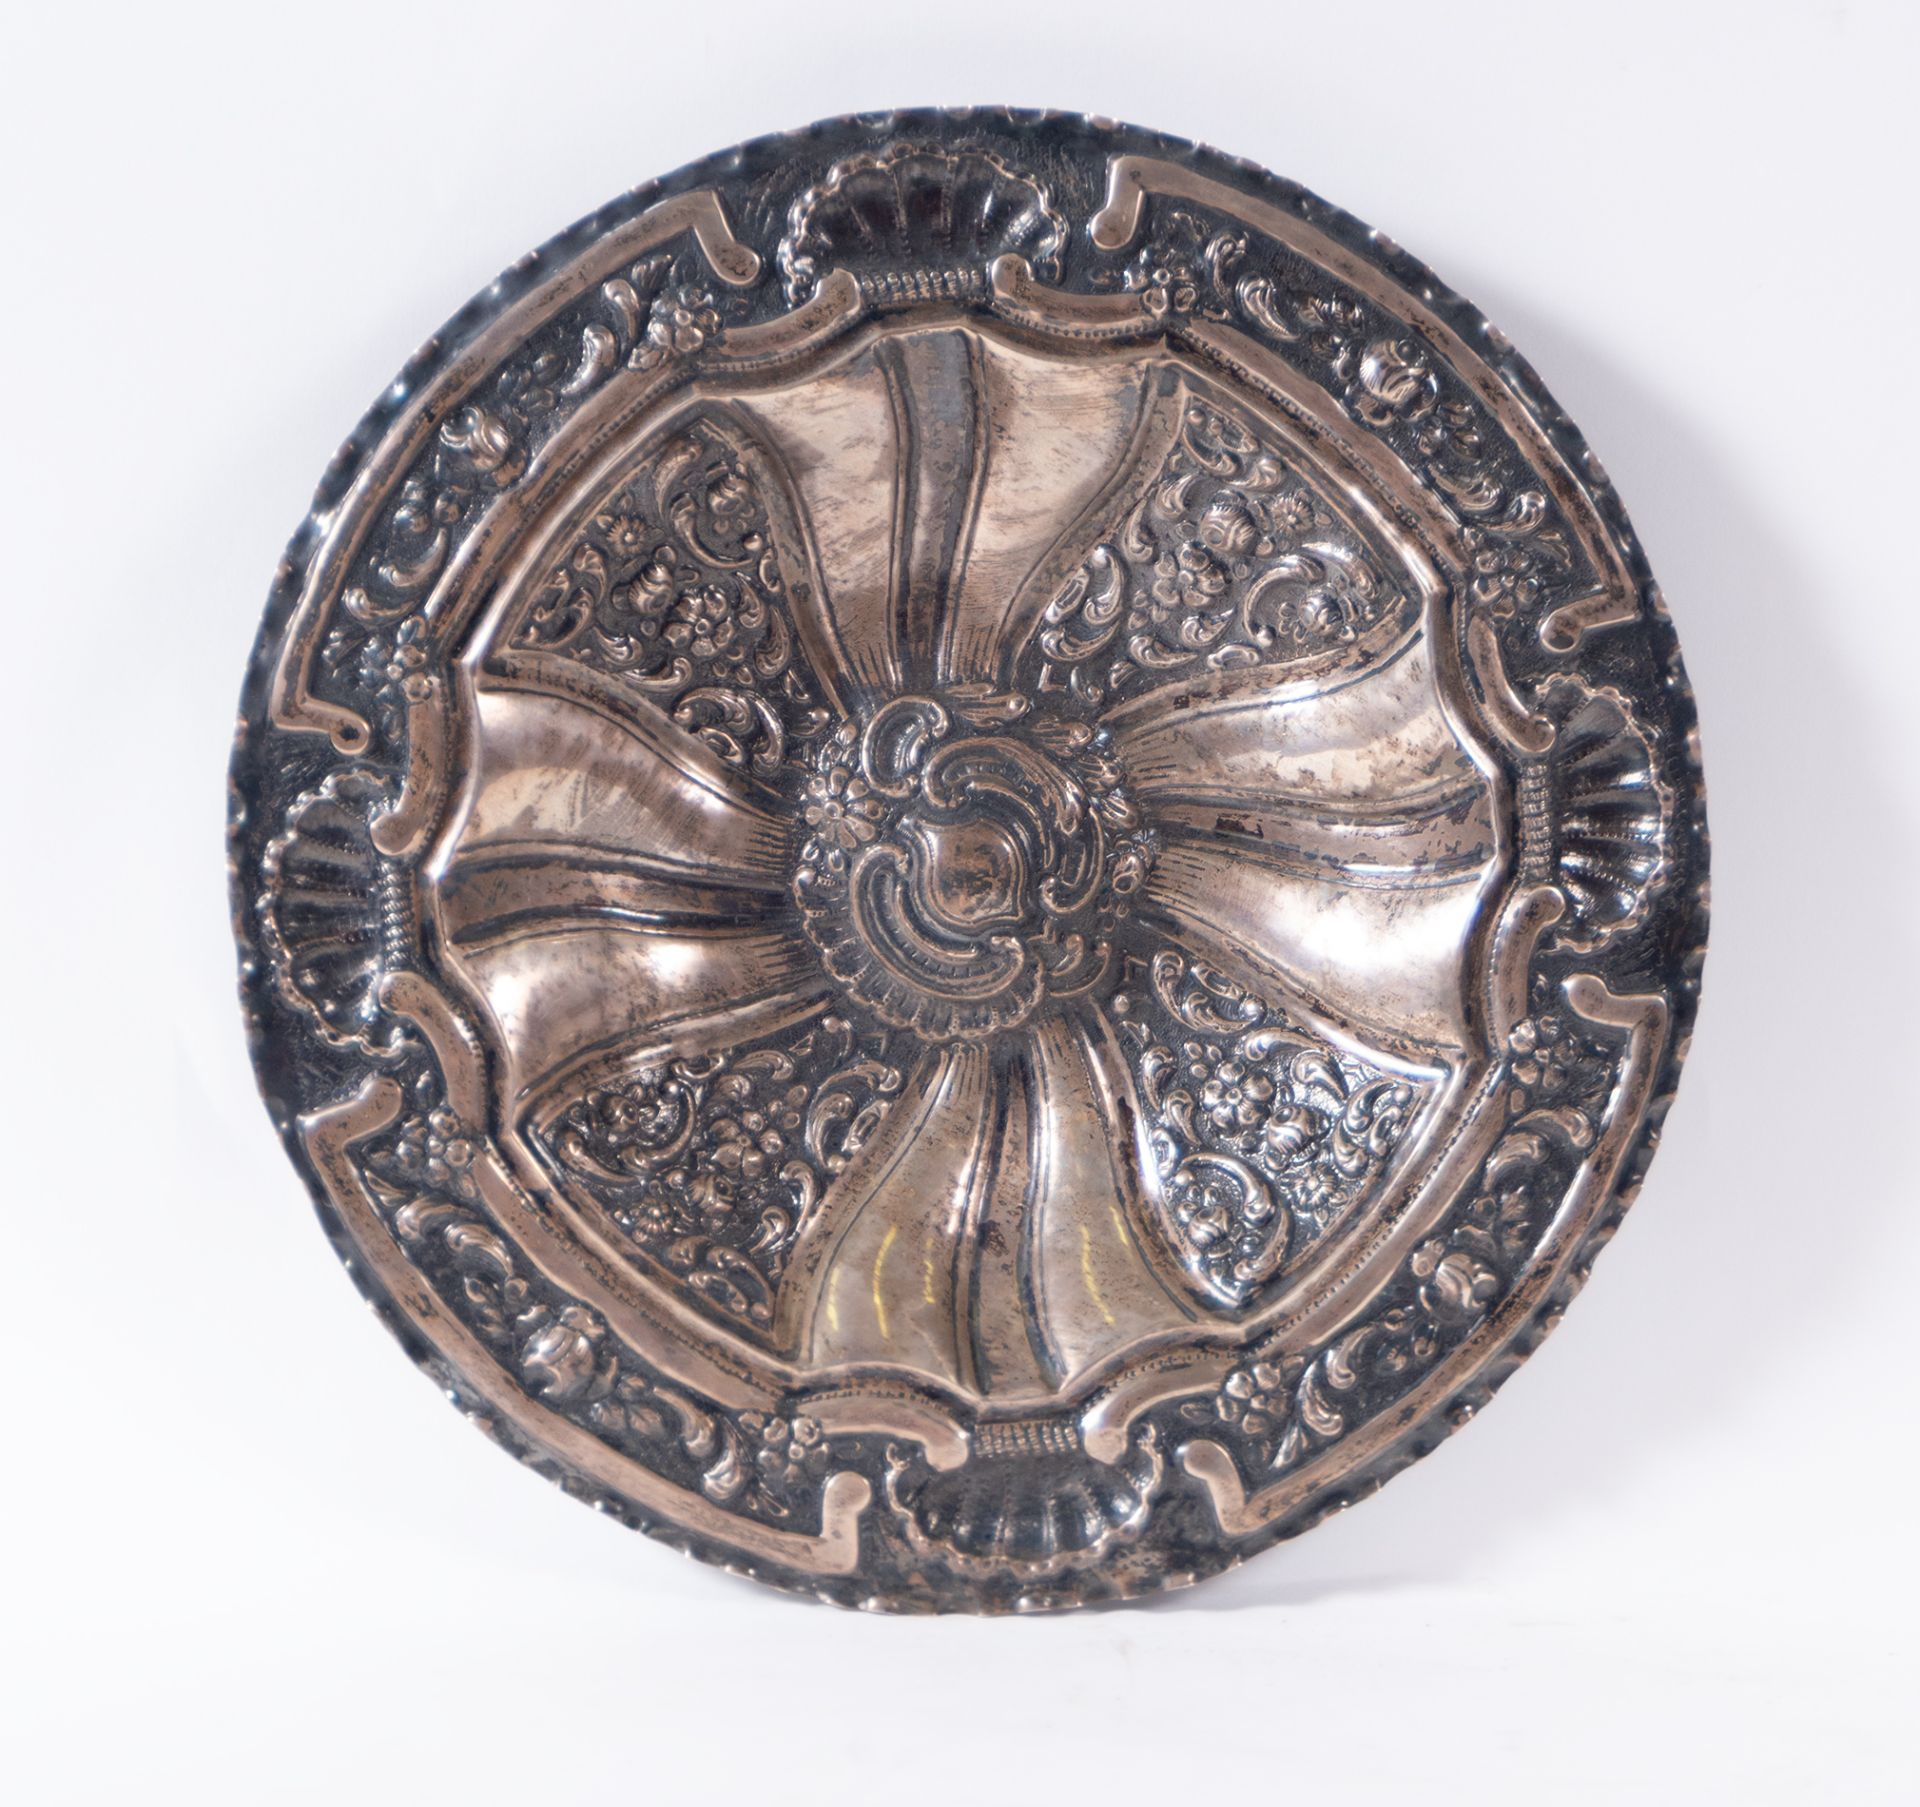 Round tray in embossed silver in the Baroque style, Spanish school of the 18th - 19th centuries